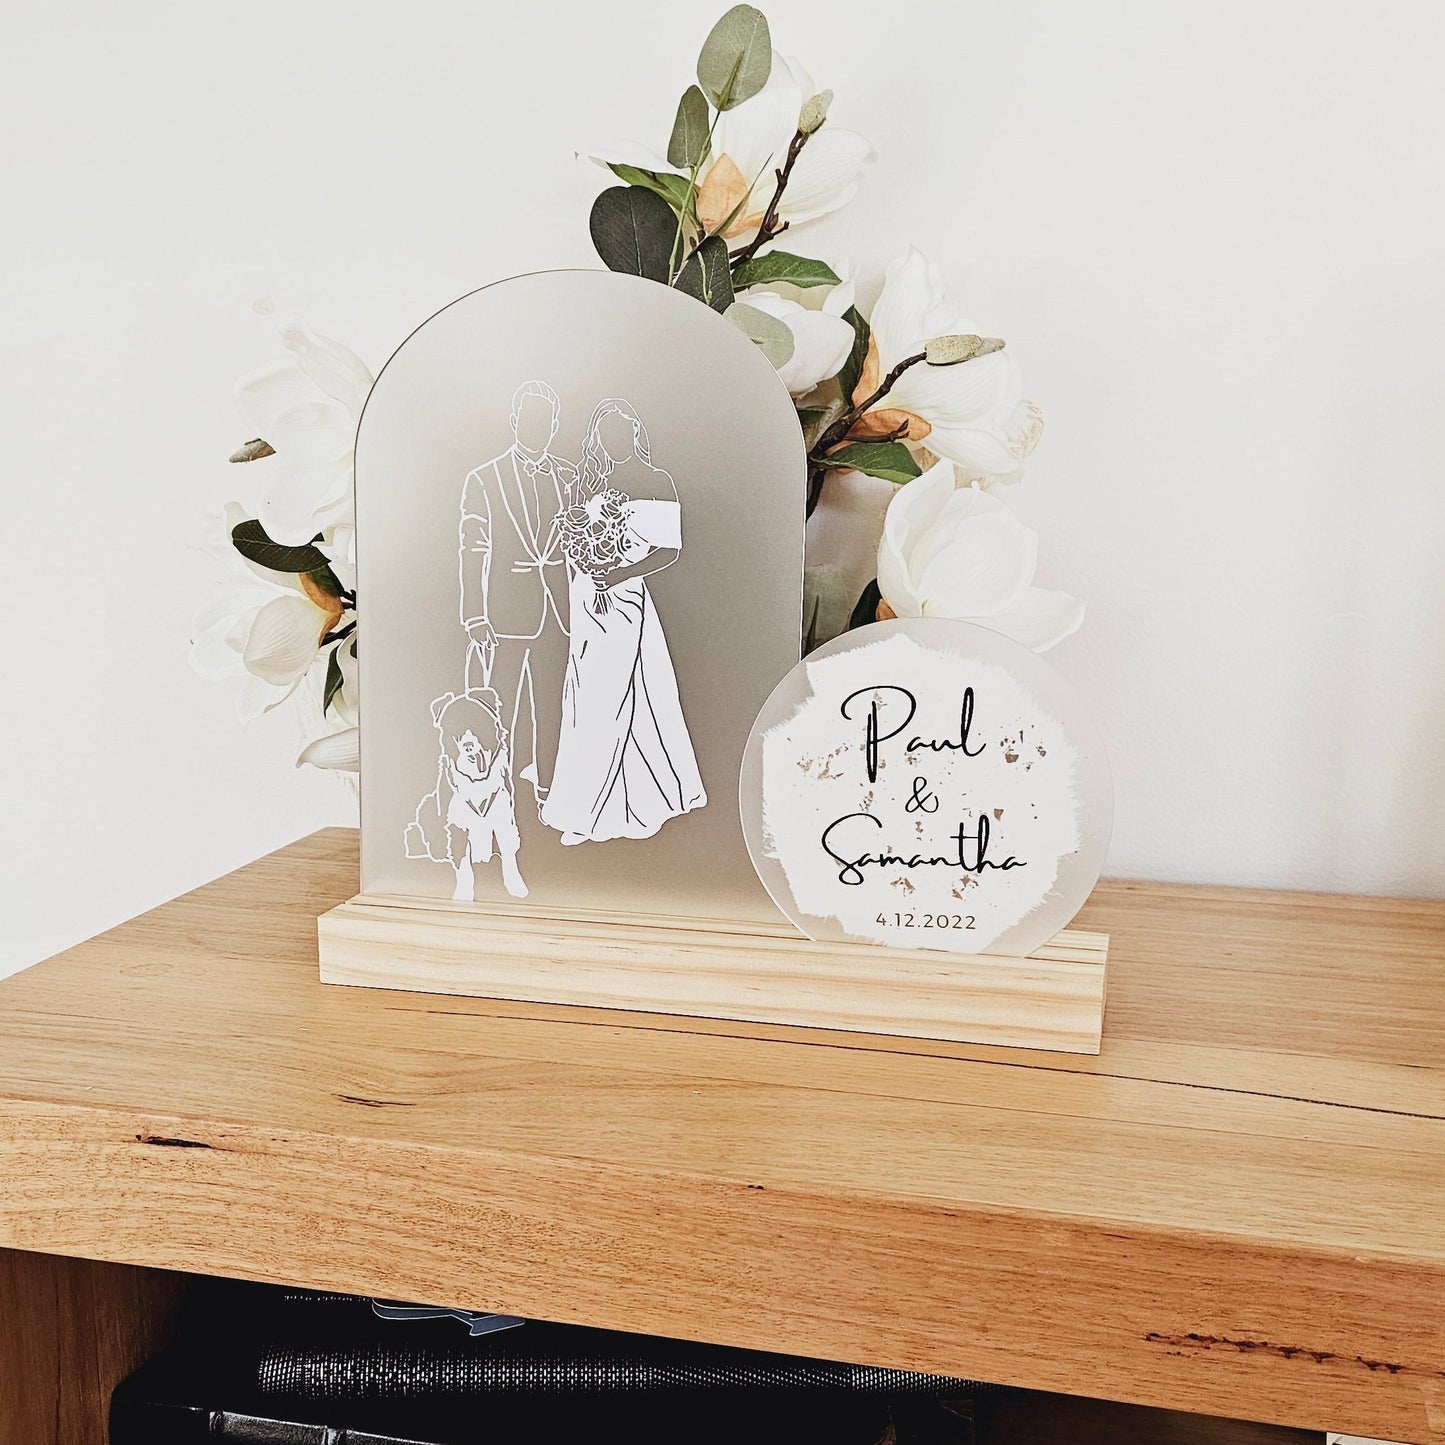 This image shows an illustration on an arch. The illustration is in white vinyl and shows a dog, a groom and a bride in a white wedding dress. The arch is sitting in a pine timber base. There is a circle acrylic shape next to it that says "Paul and Samantha" and the date 4.12.2022. It is perfect as a wedding or anniversary gift